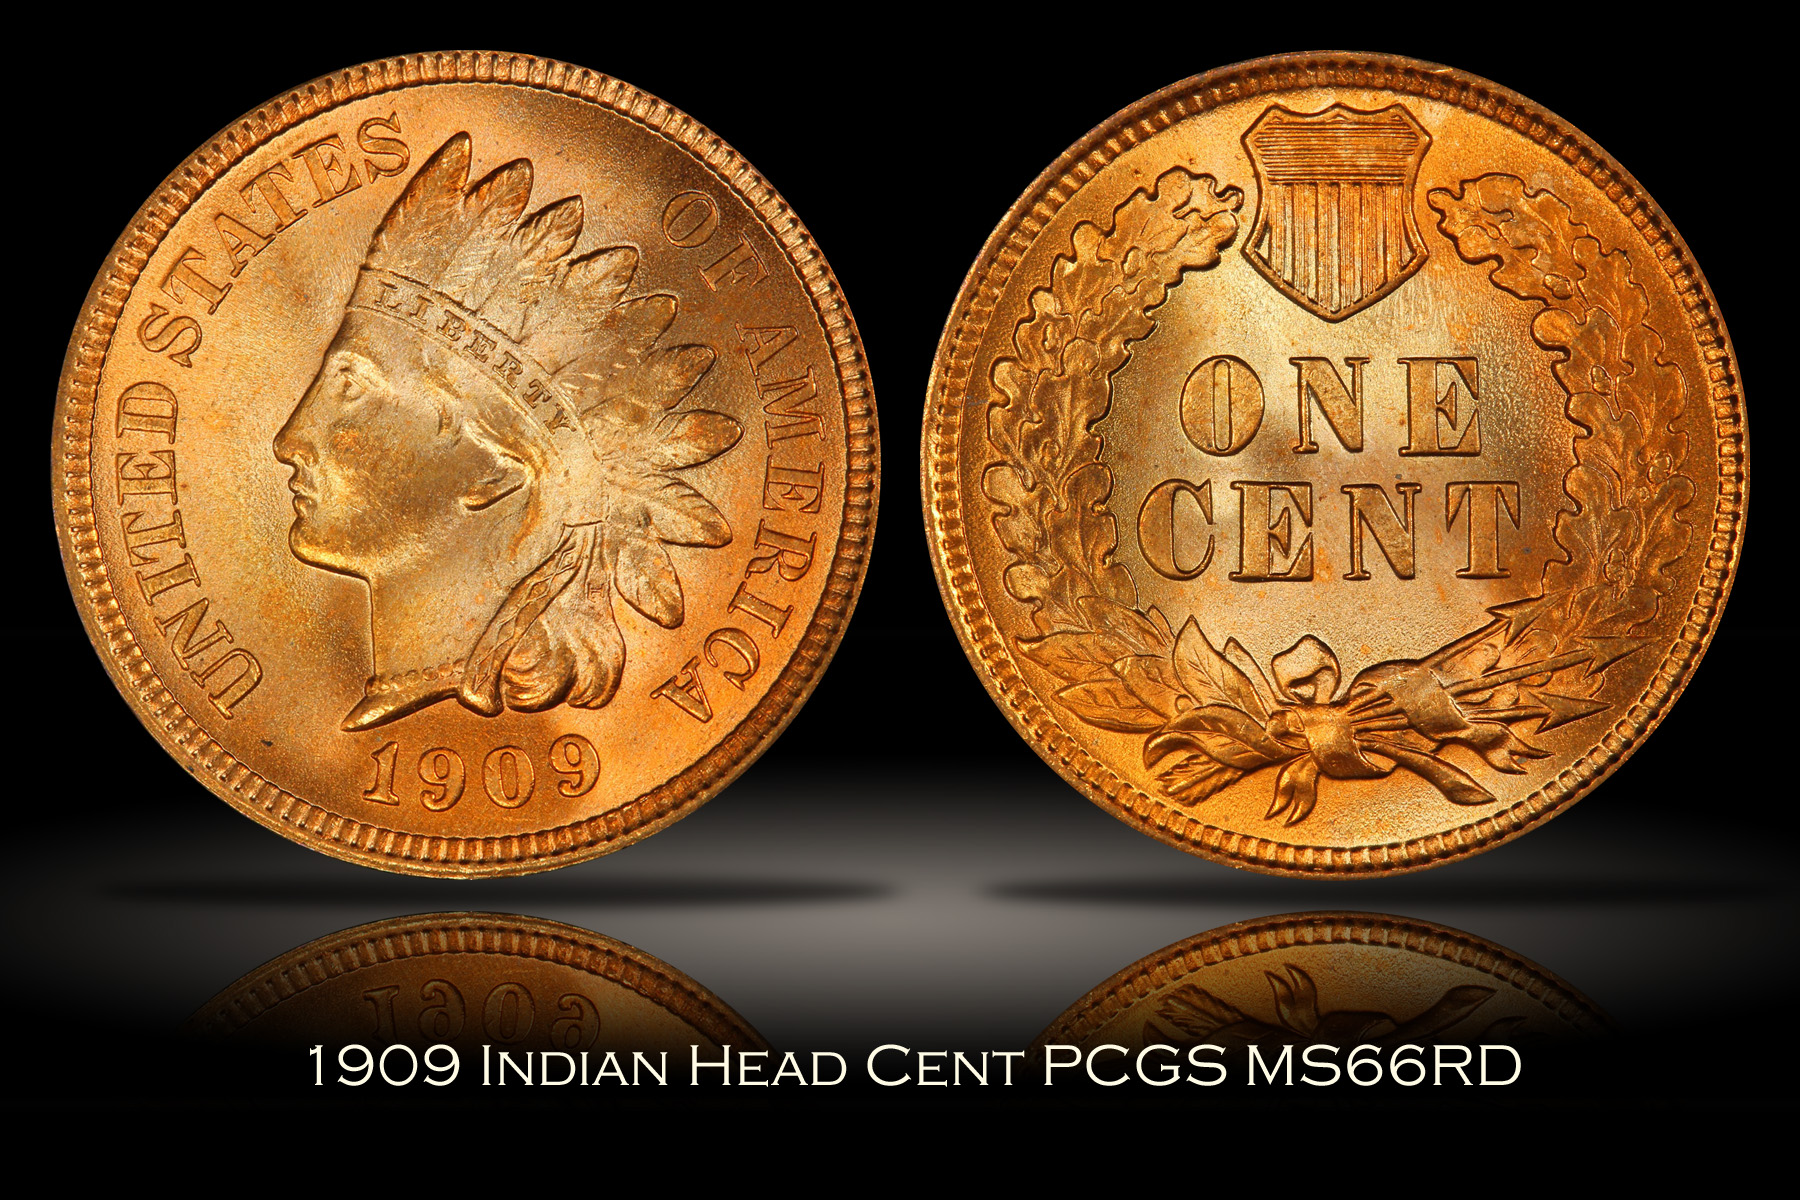 1909 Indian Head Cent PCGS MS66RD